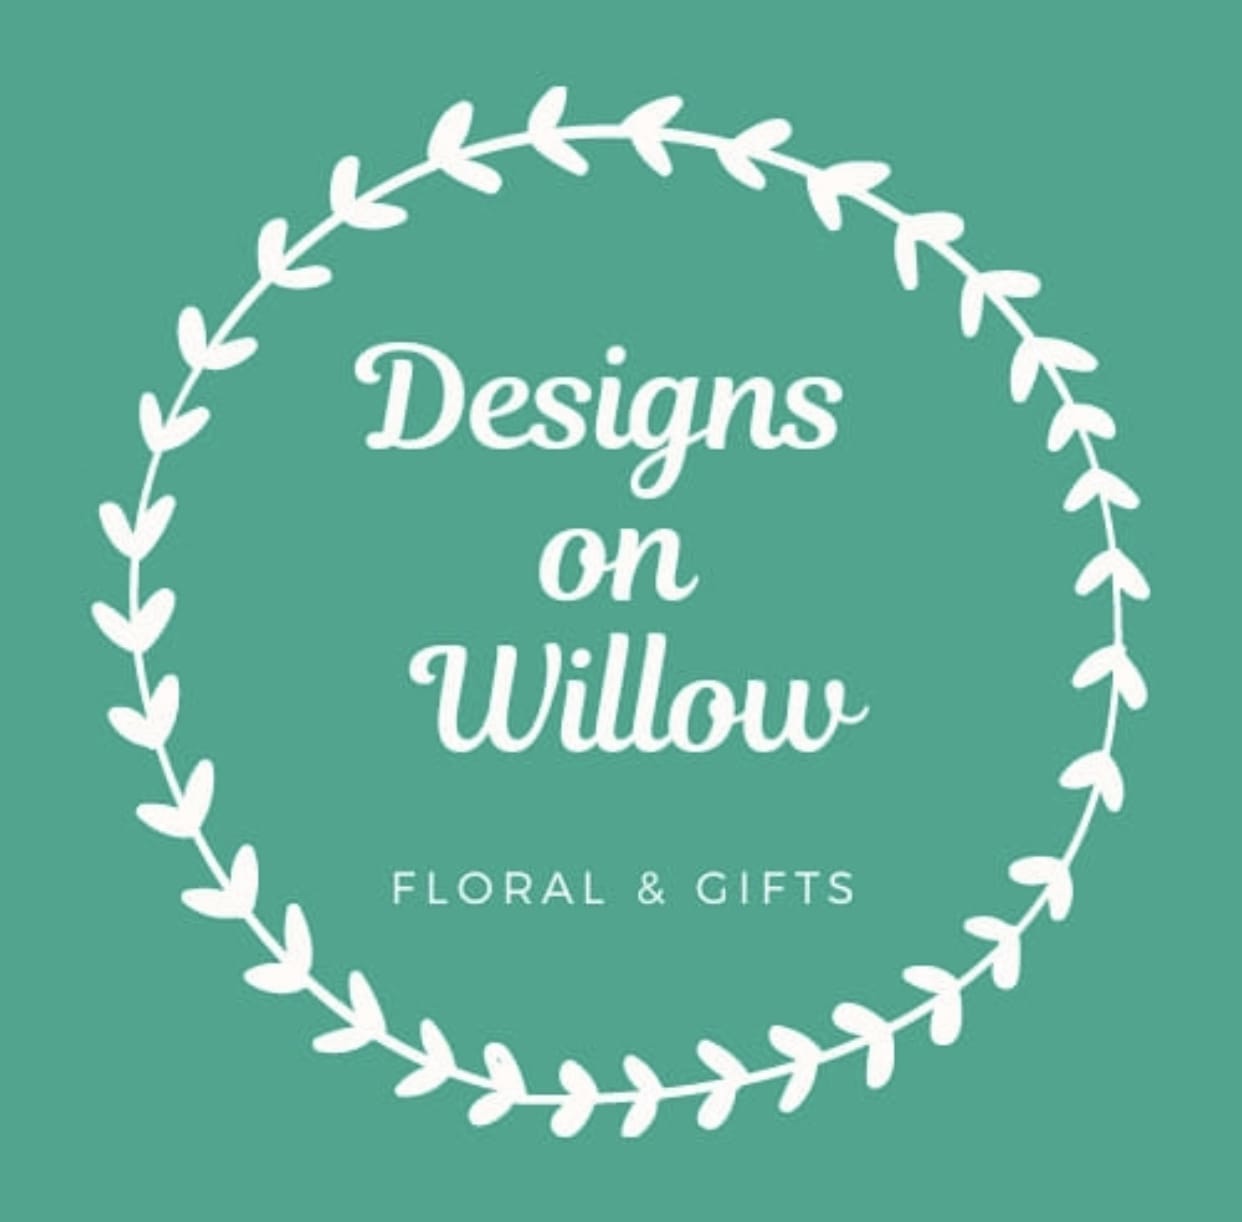 Designs on Willow